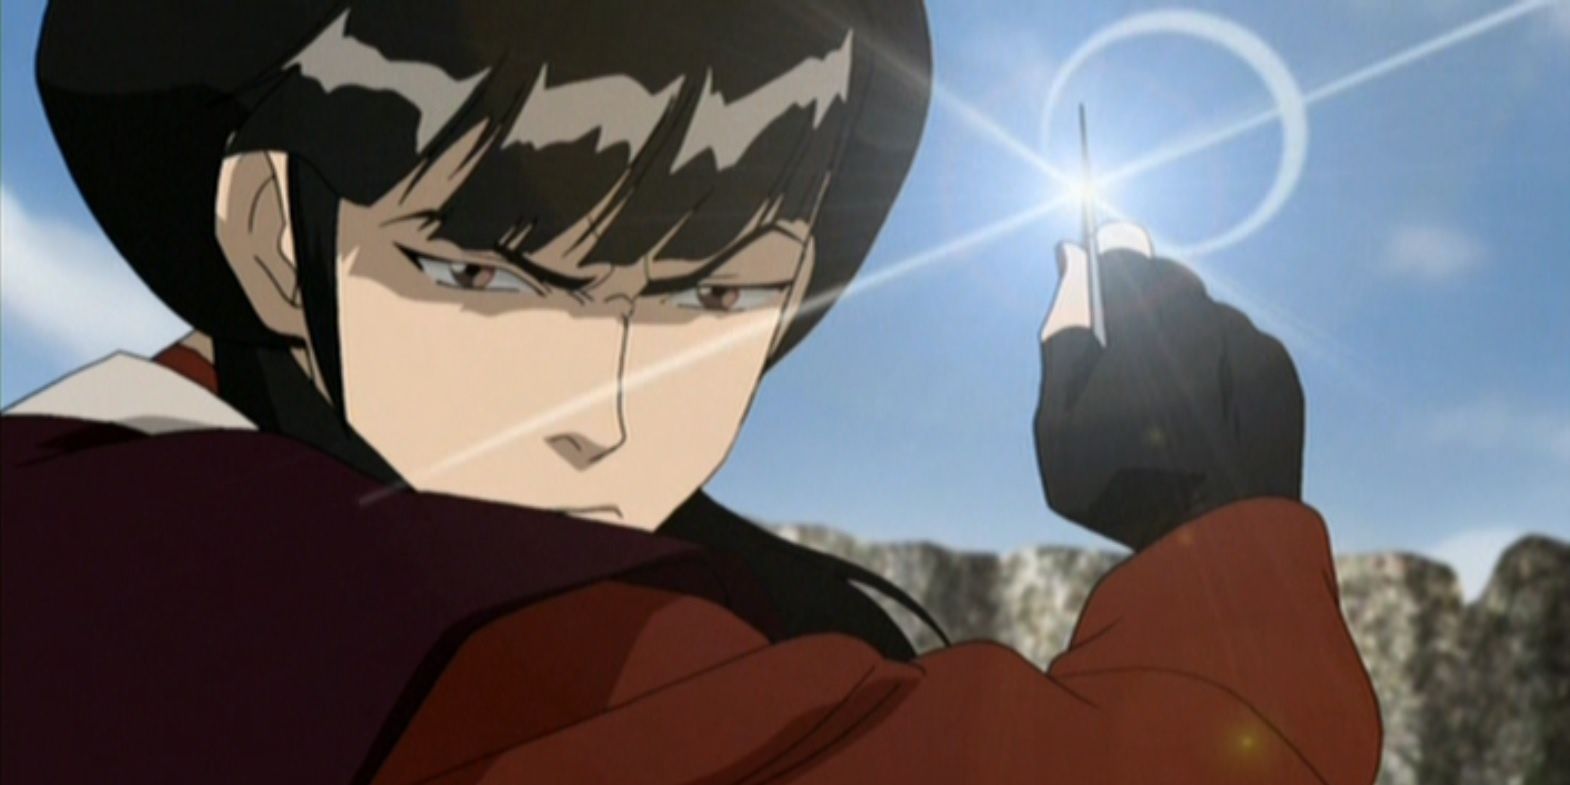 Mai holding one of her throwing knives in Avatar: The Last Airbender using throwing stars.